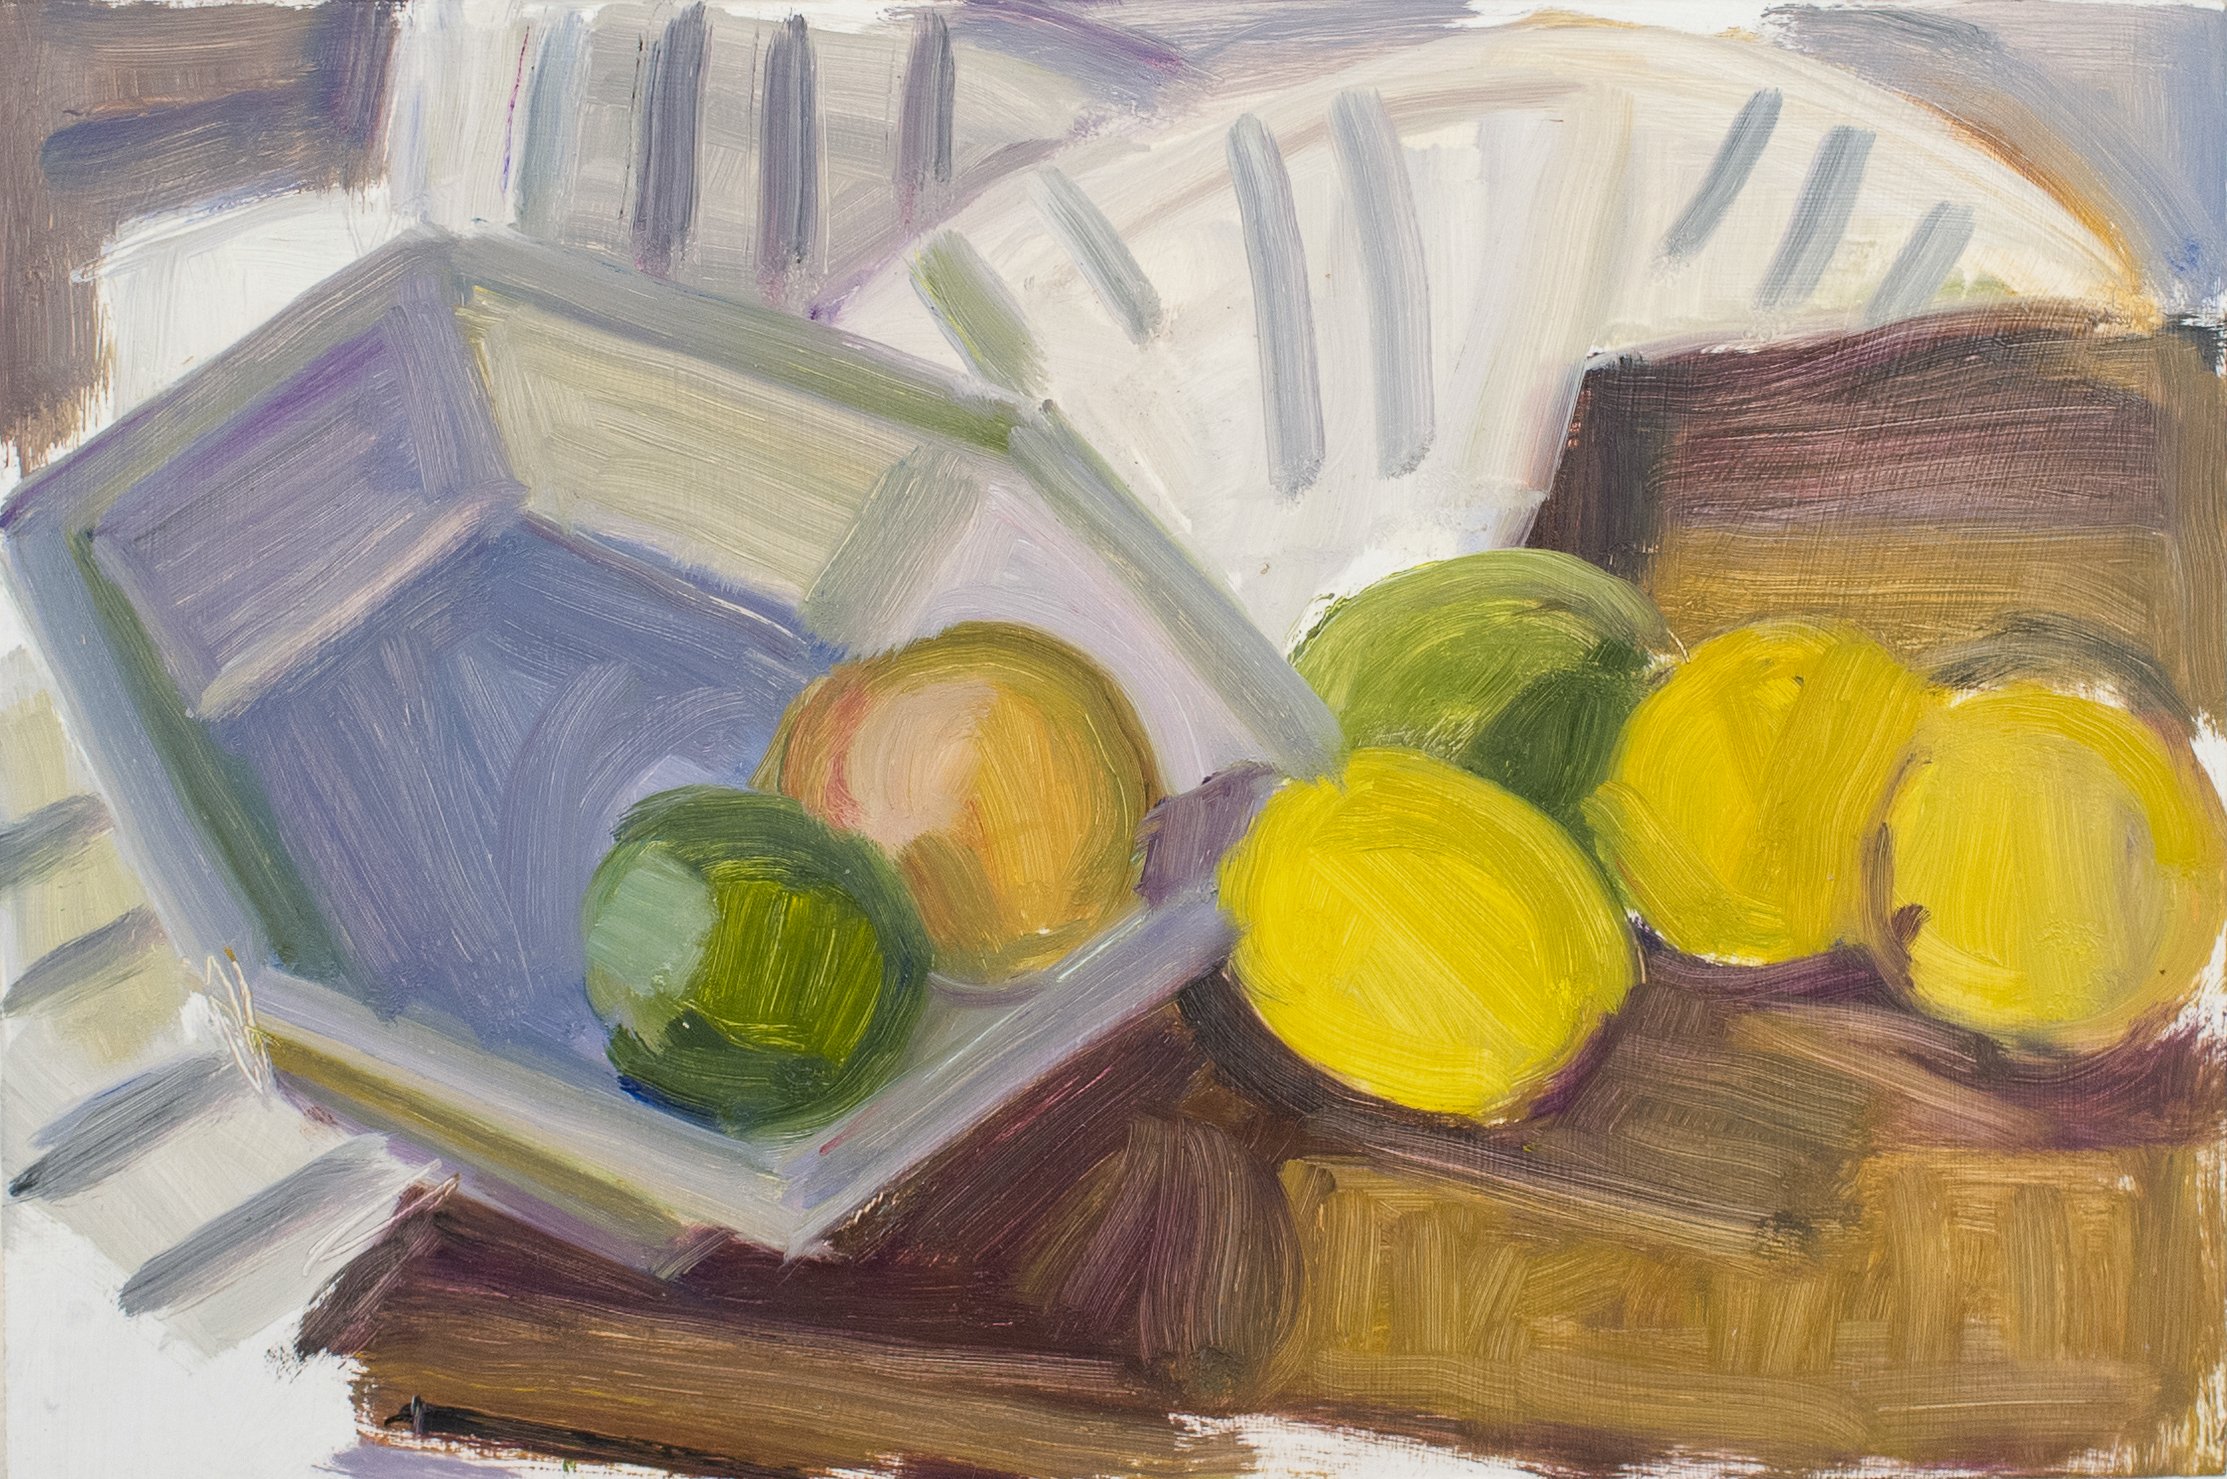   Lemons and Limes with Hexagonal Pie Tin, Gray Striped Cloth , c. 2015, oil/panel (signed and framed), 8 x 12 in., $1,000 